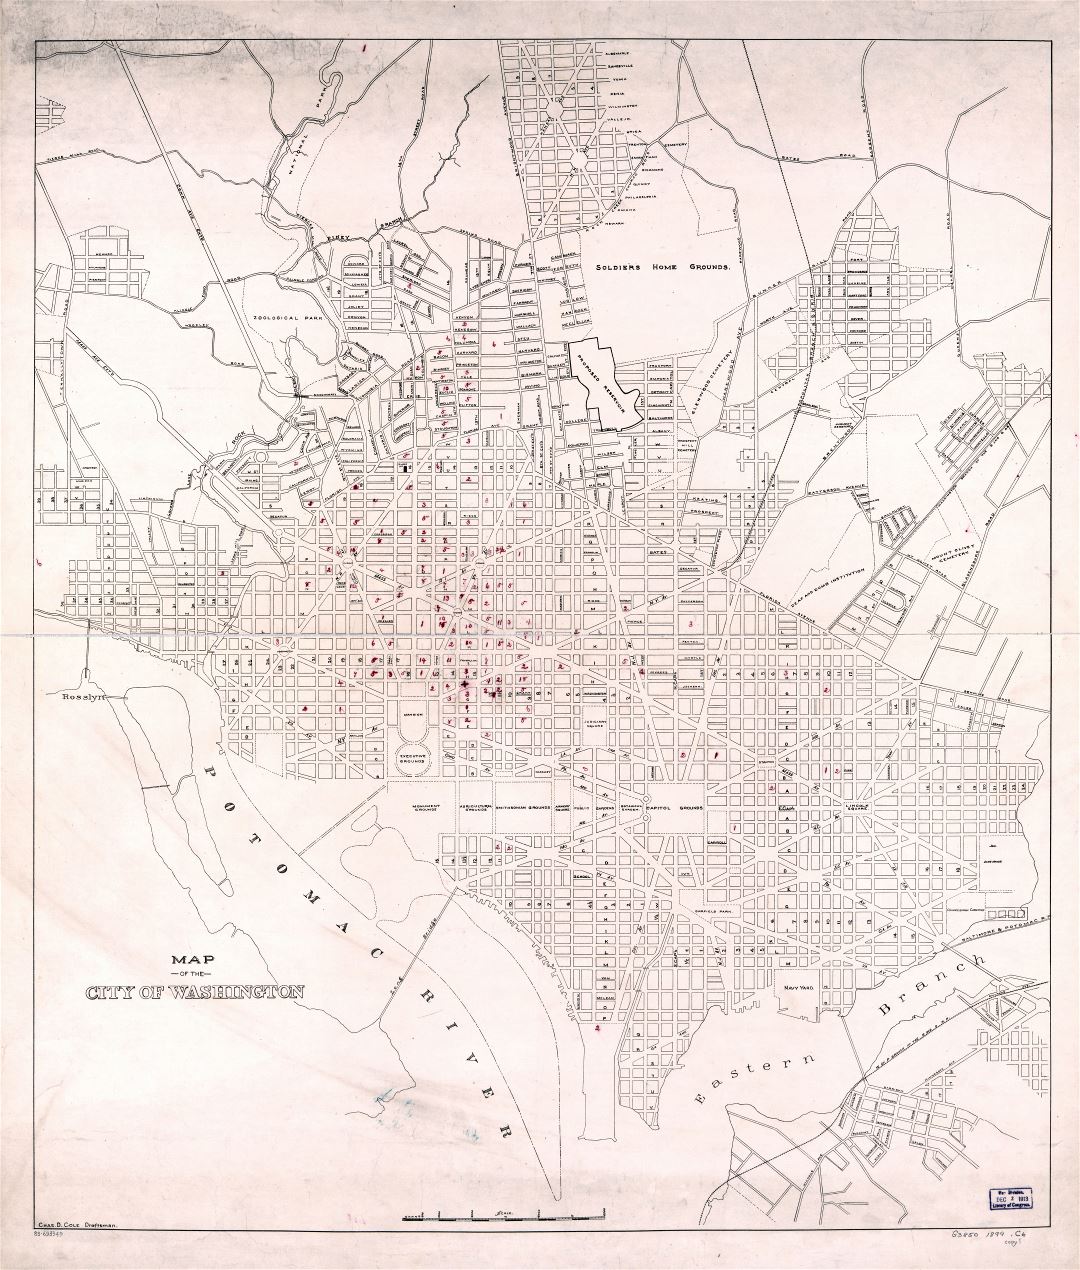 Large scale detailed old map of the city of Washington D.C. - 1899